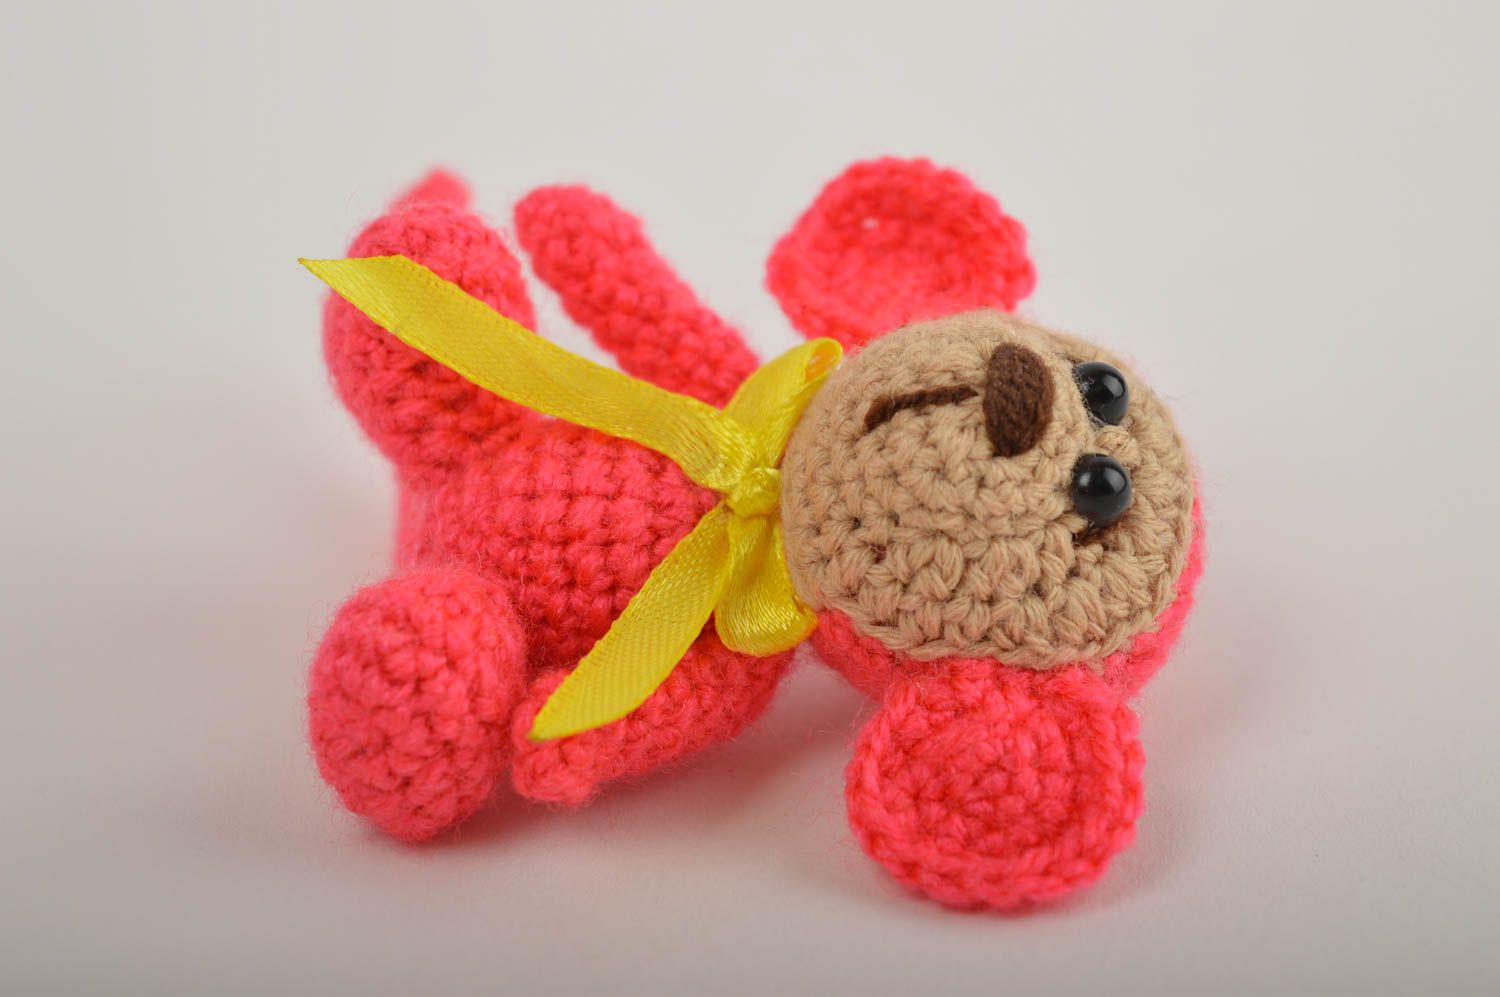 Crocheted handmade toys decorative soft toys for children stuffed toys for baby photo 4